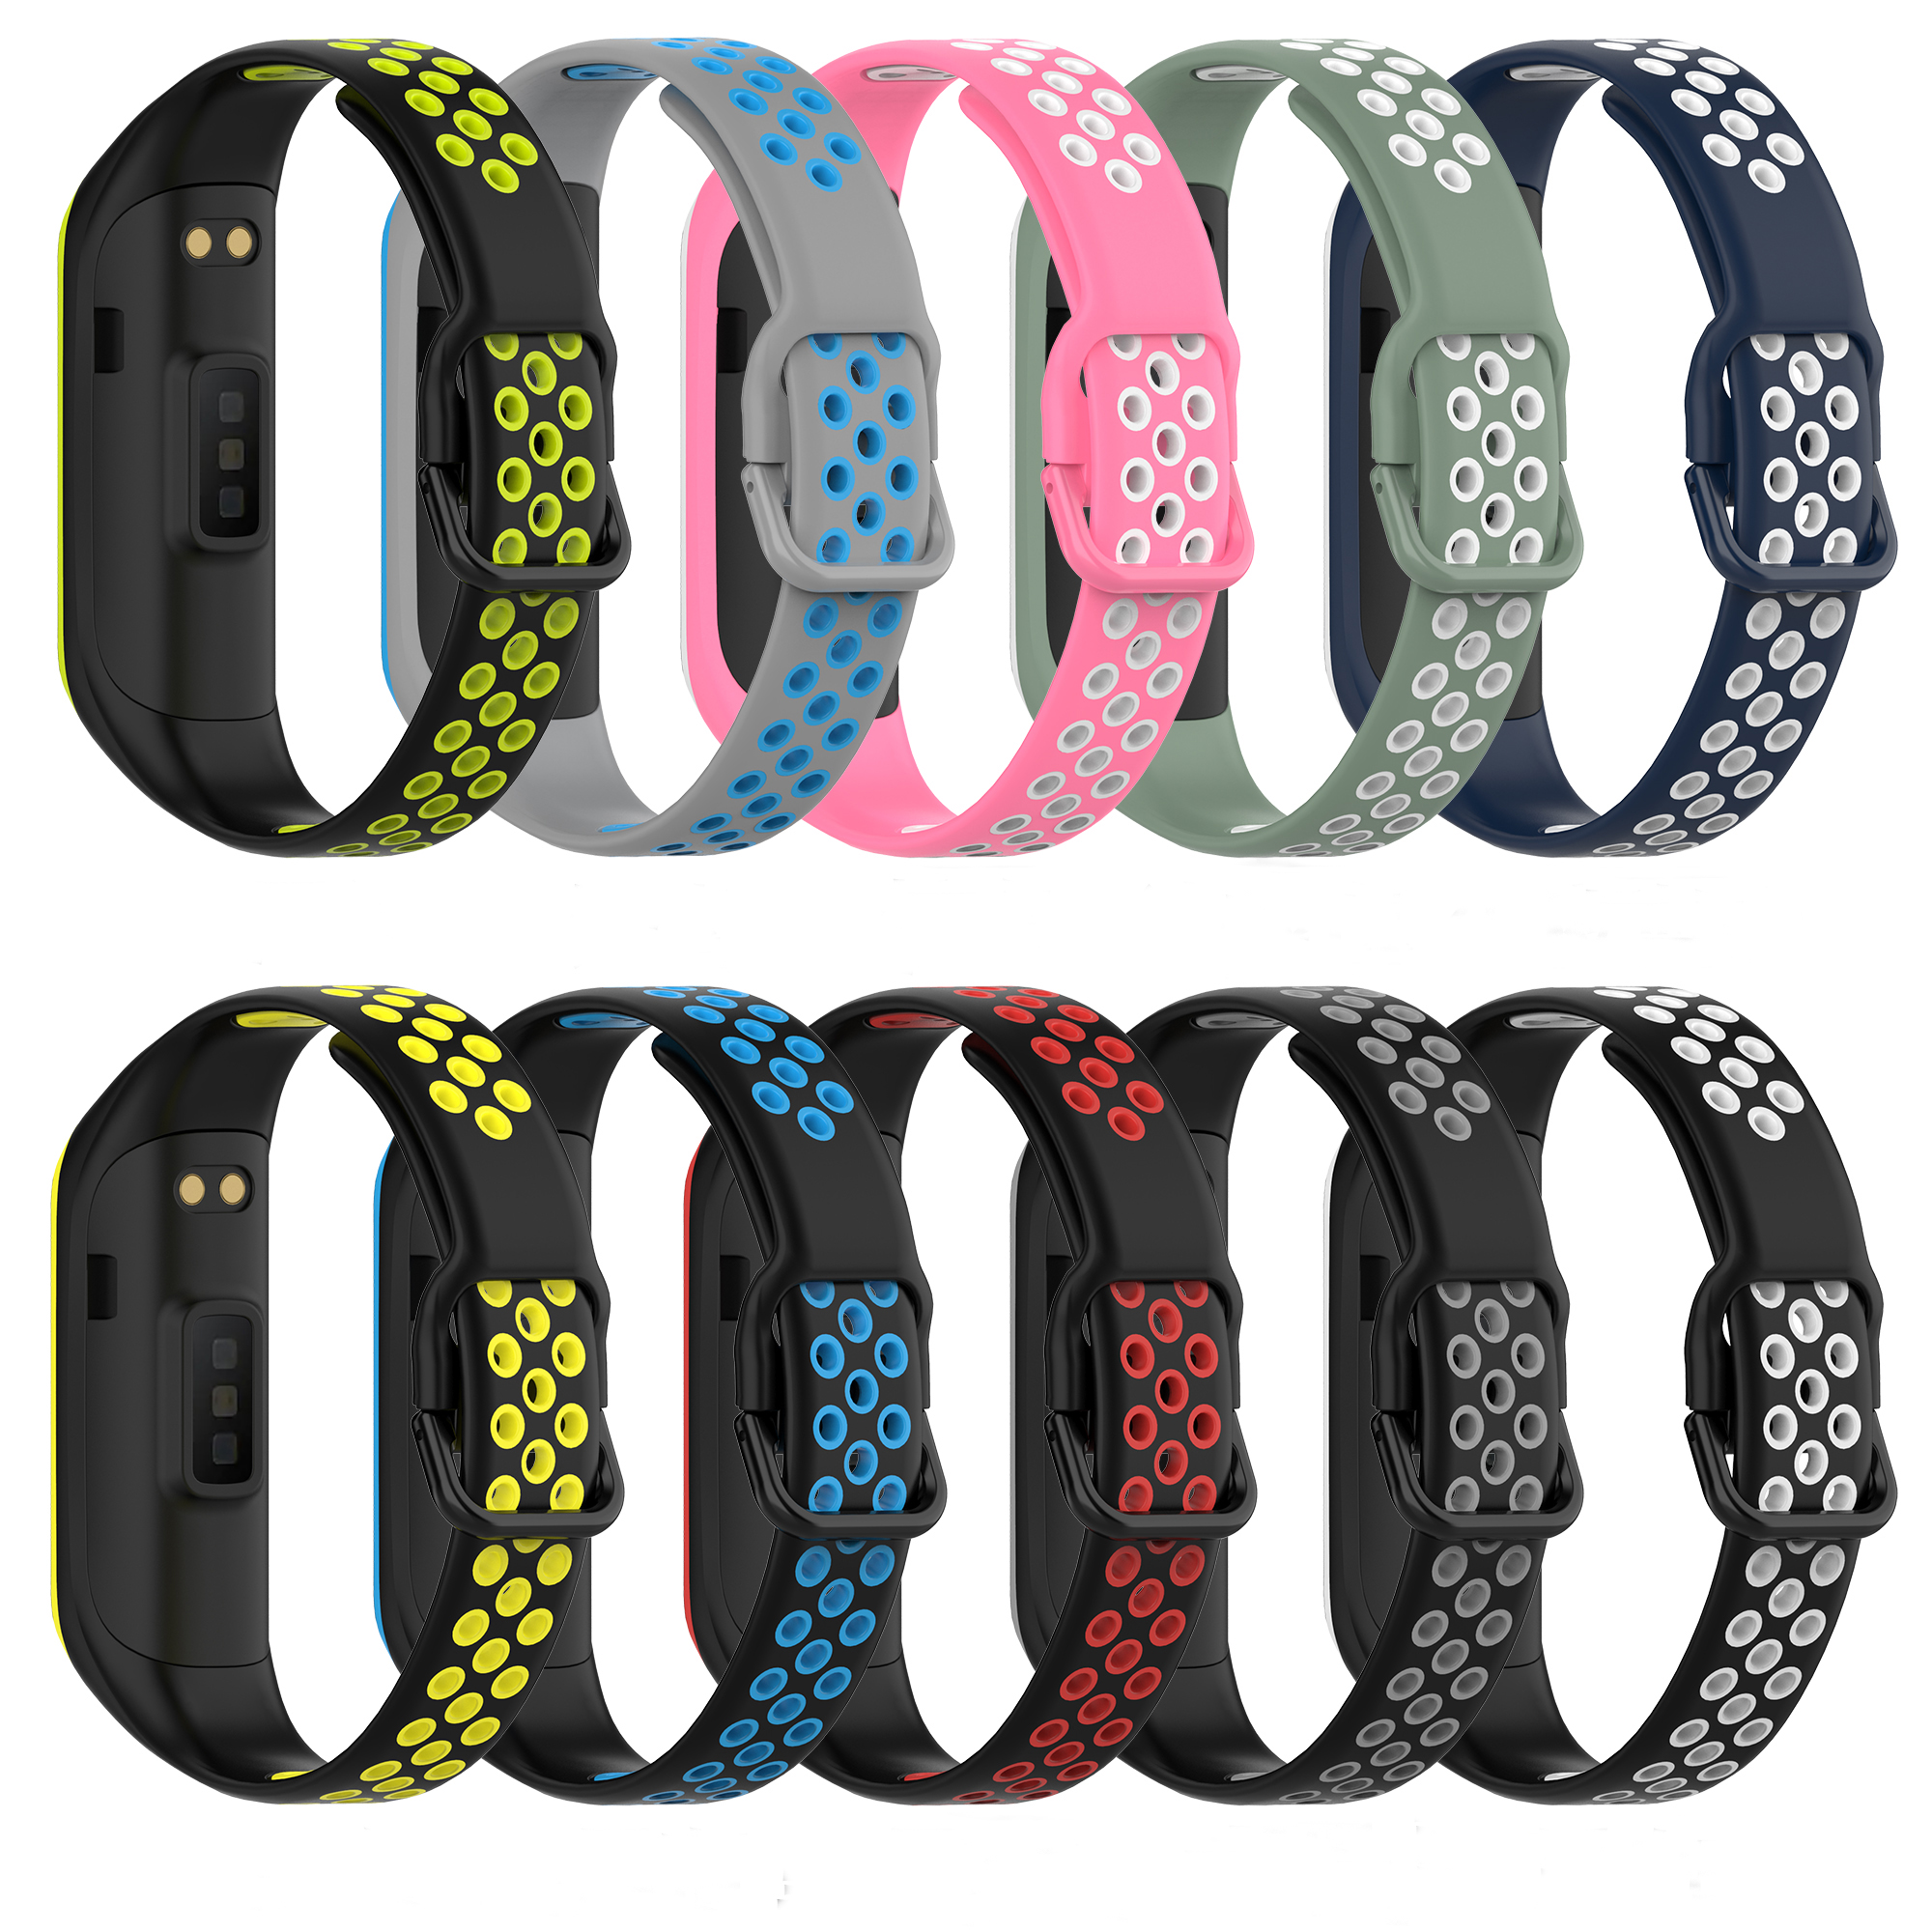 Bakeey-Rubber-Two-color-Replacement-Strap-Smart-Watch-Band-For-Samsung-Galaxy-Fit-2-1806558-3